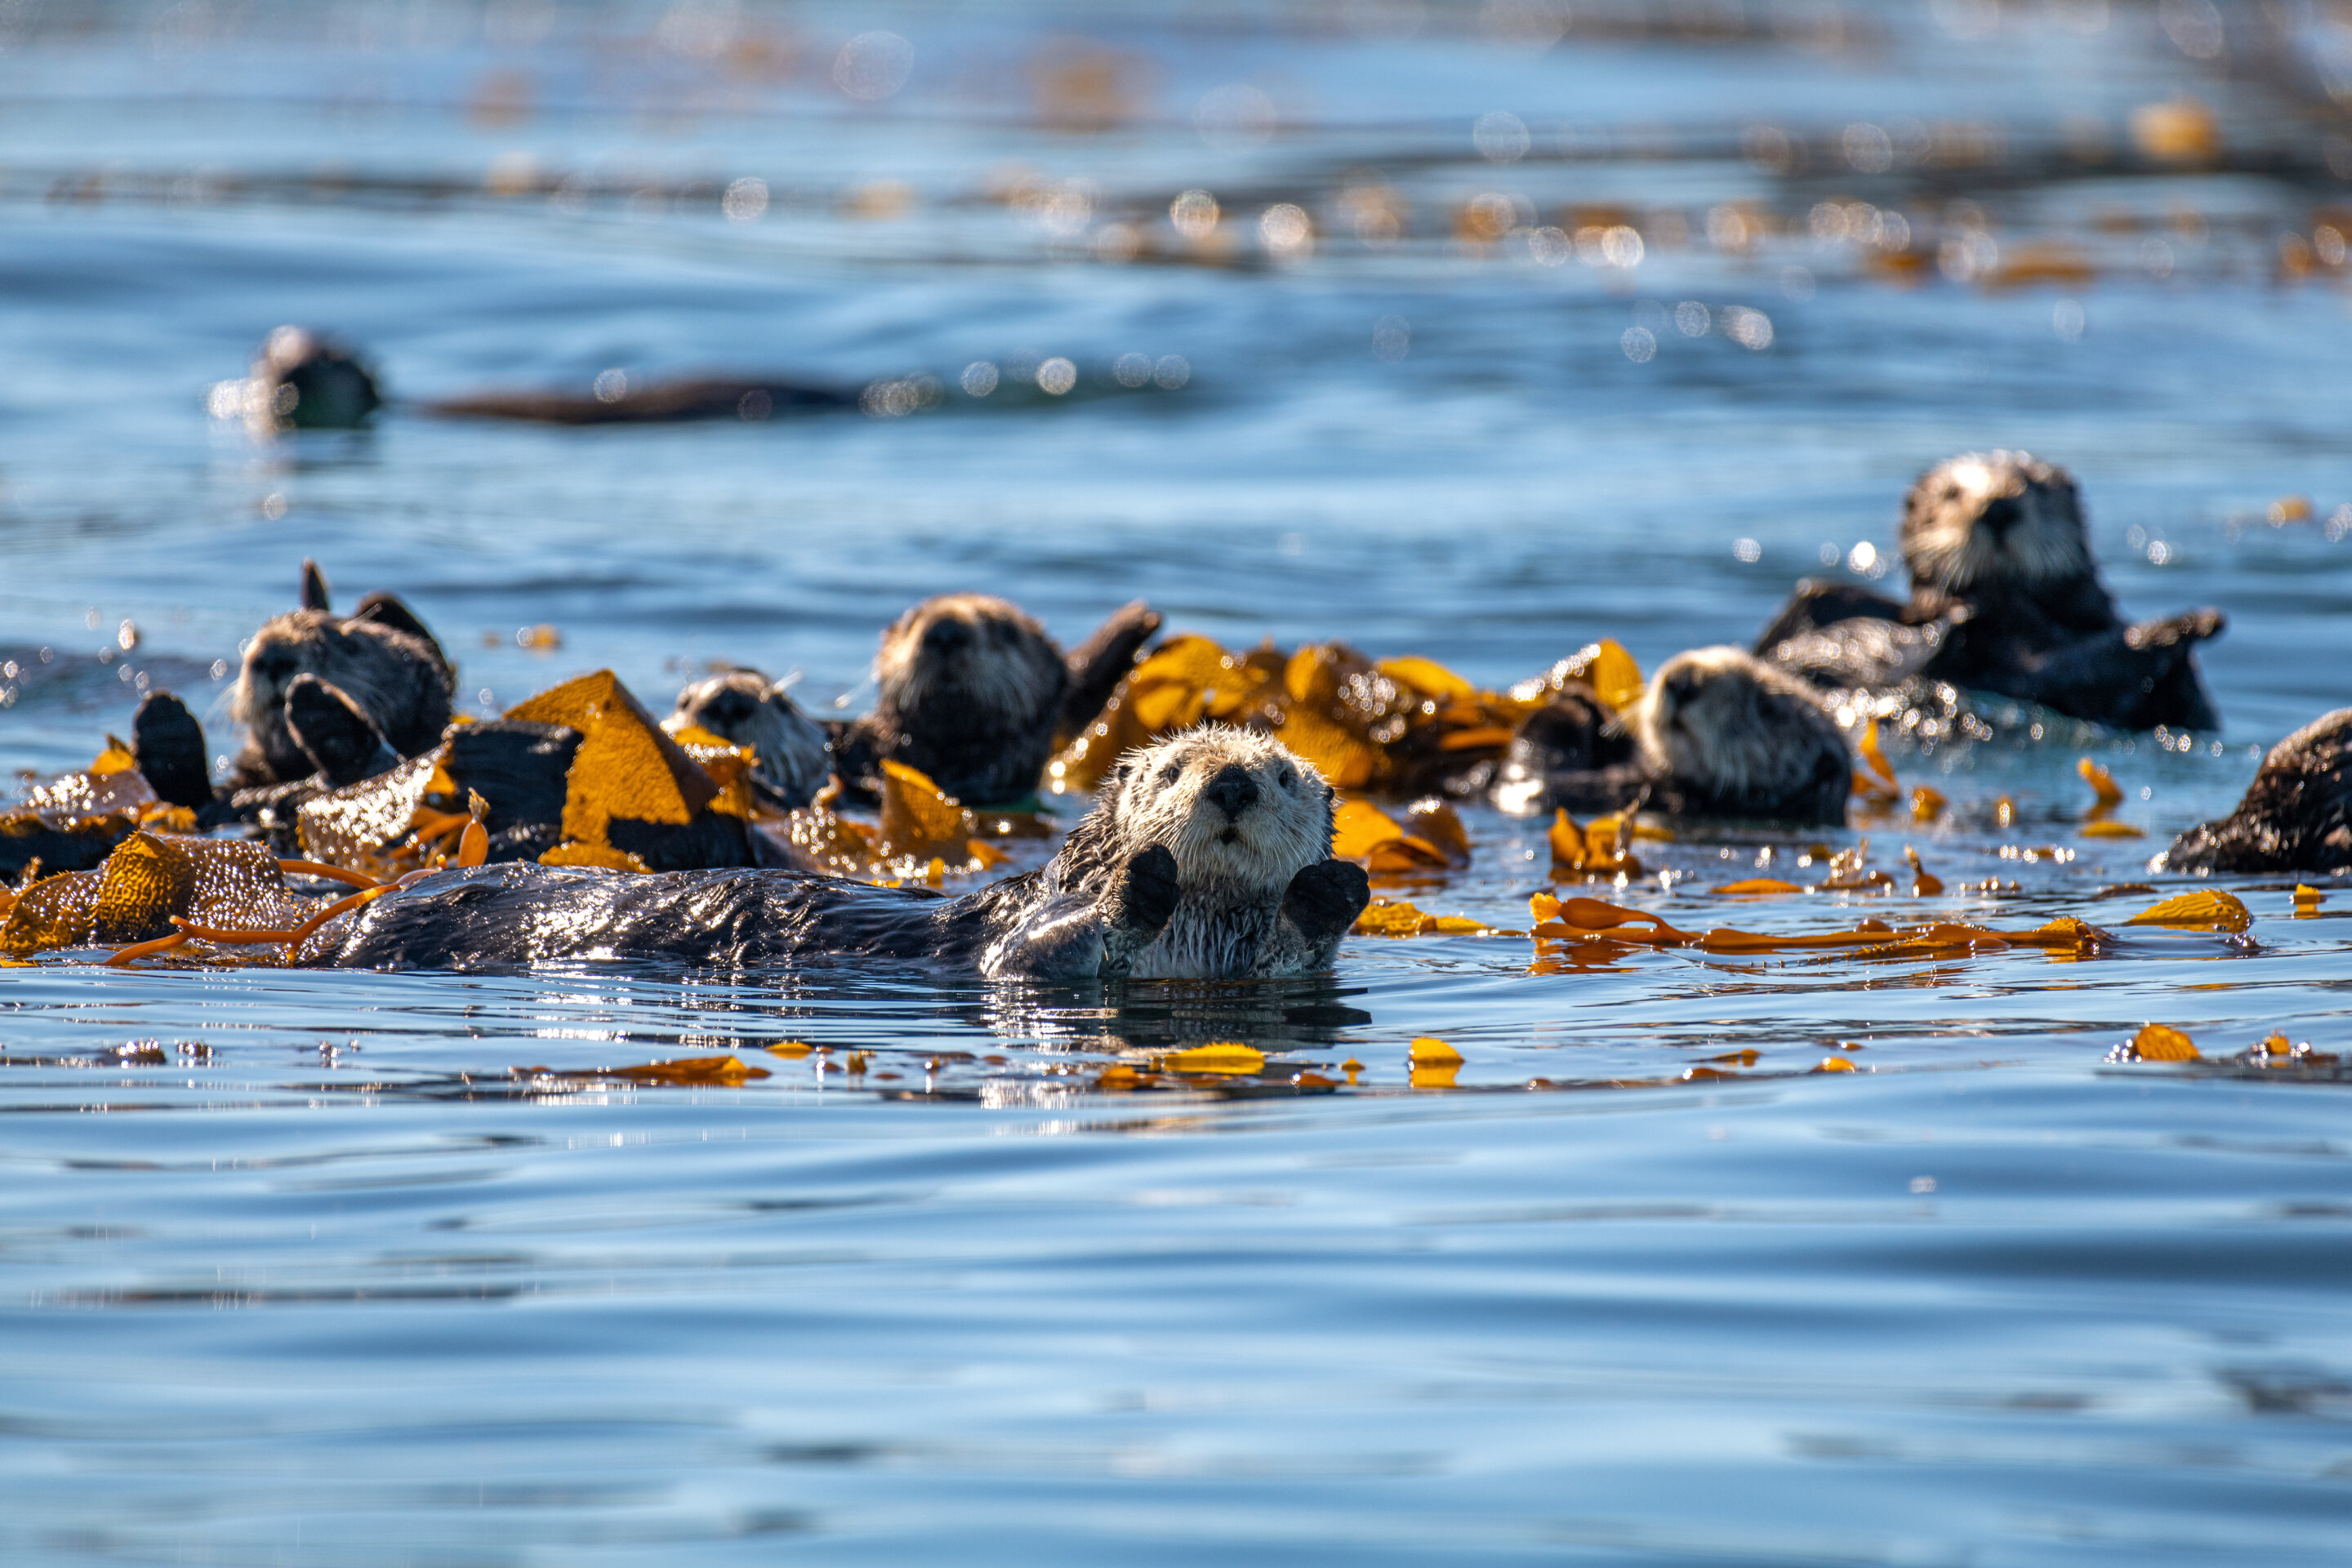 A new study shows that sea otters helped prevent the widespread decline of California’s kelp forests over the past century